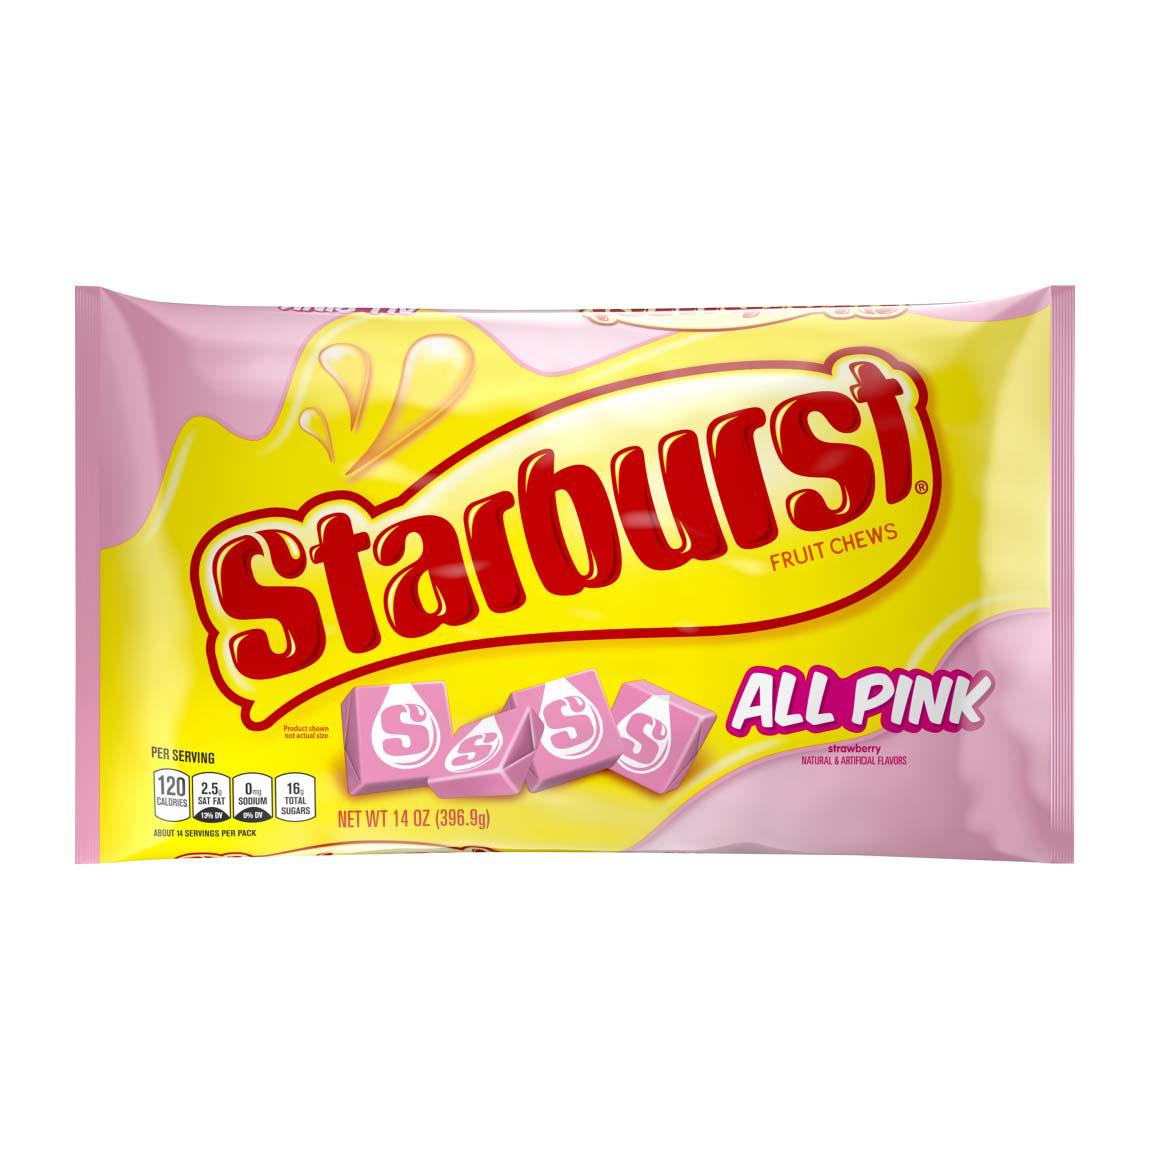 Starburst All Pink Fruit Chews Candy Bag; image 1 of 7